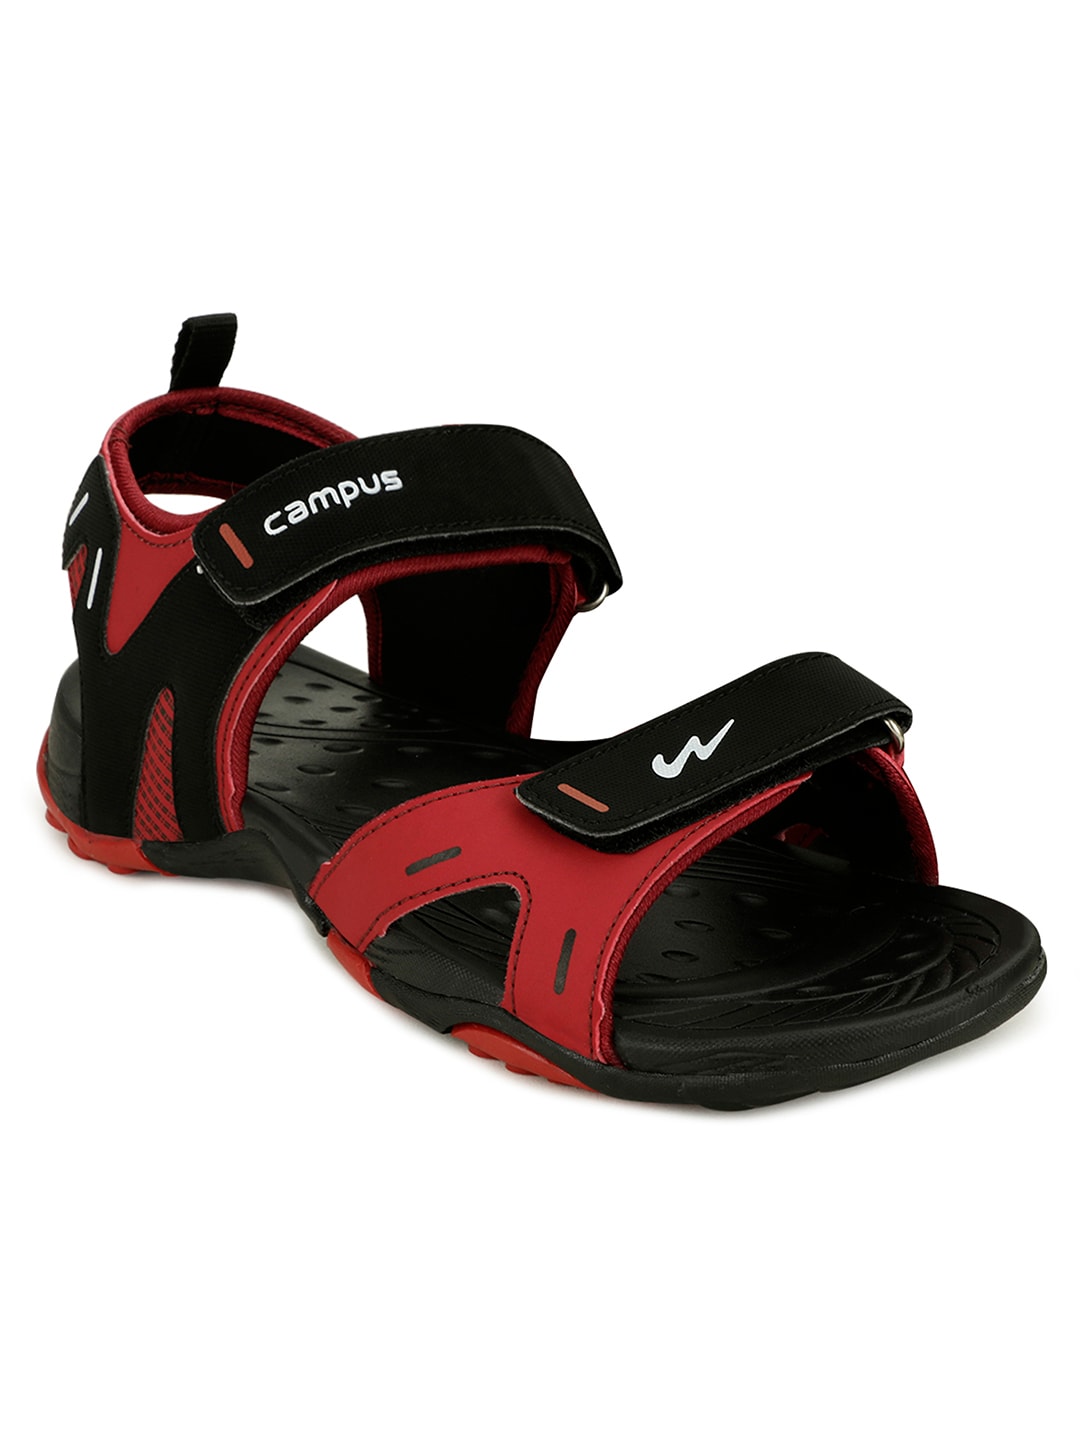 Buy Campus Sandals For Men ( Black , Red ) Online at Low Prices in India -  Paytmmall.com